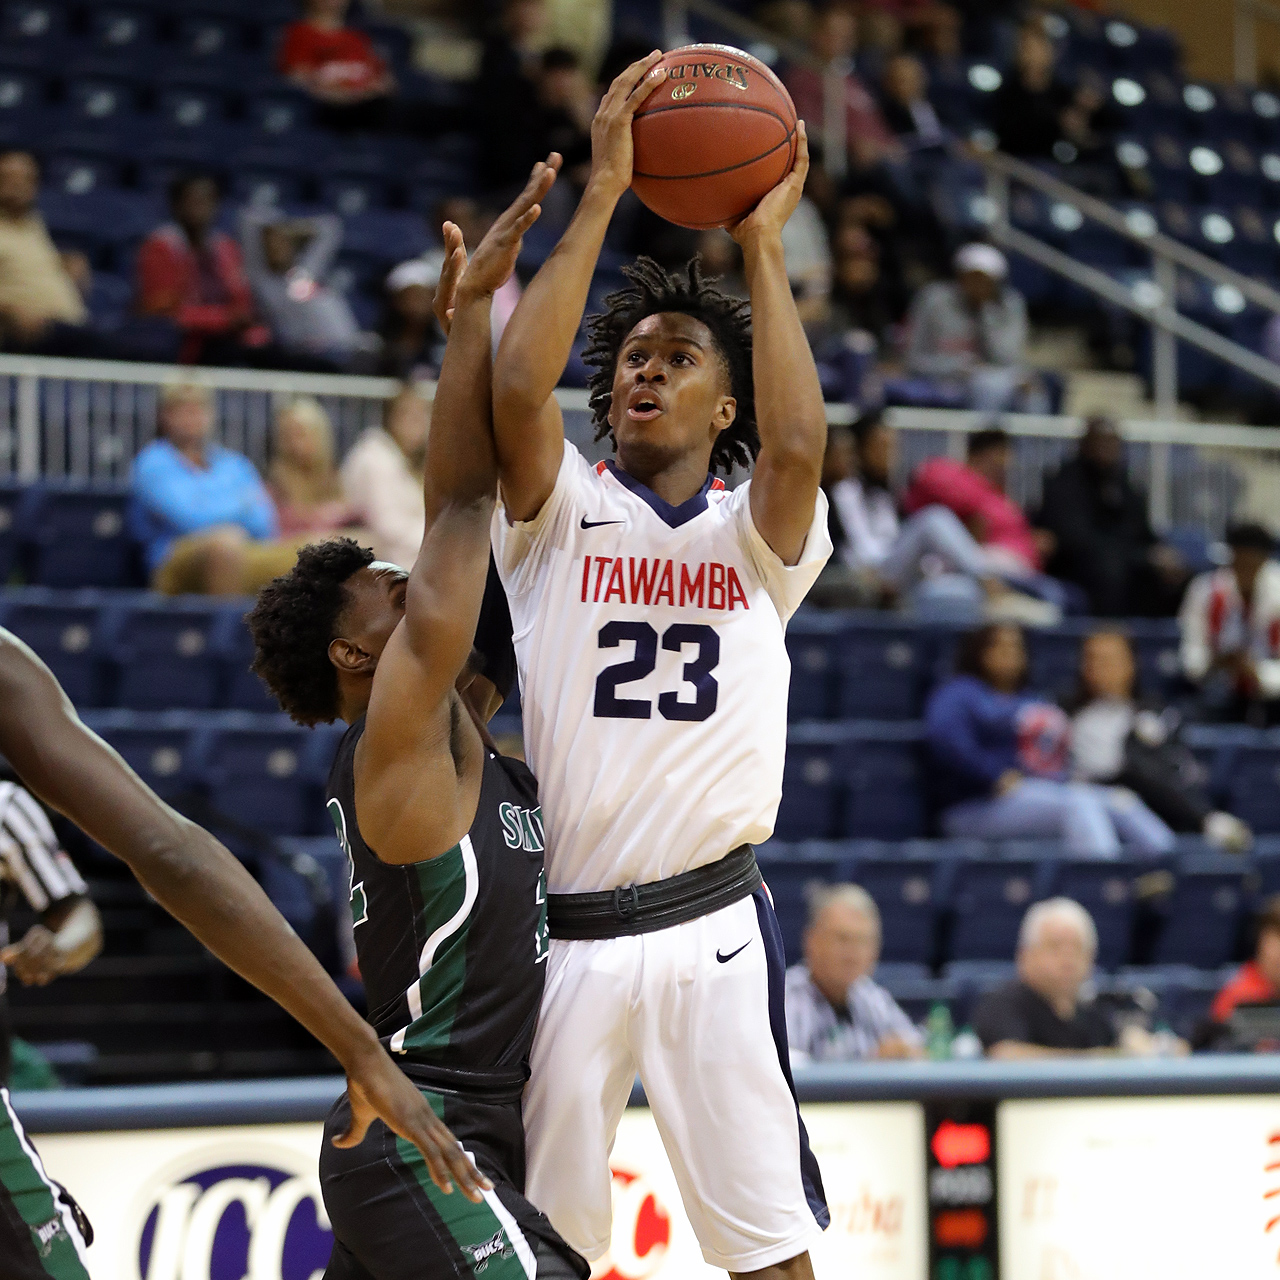 Indians hold off late rally to beat Baton Rouge, 72-69